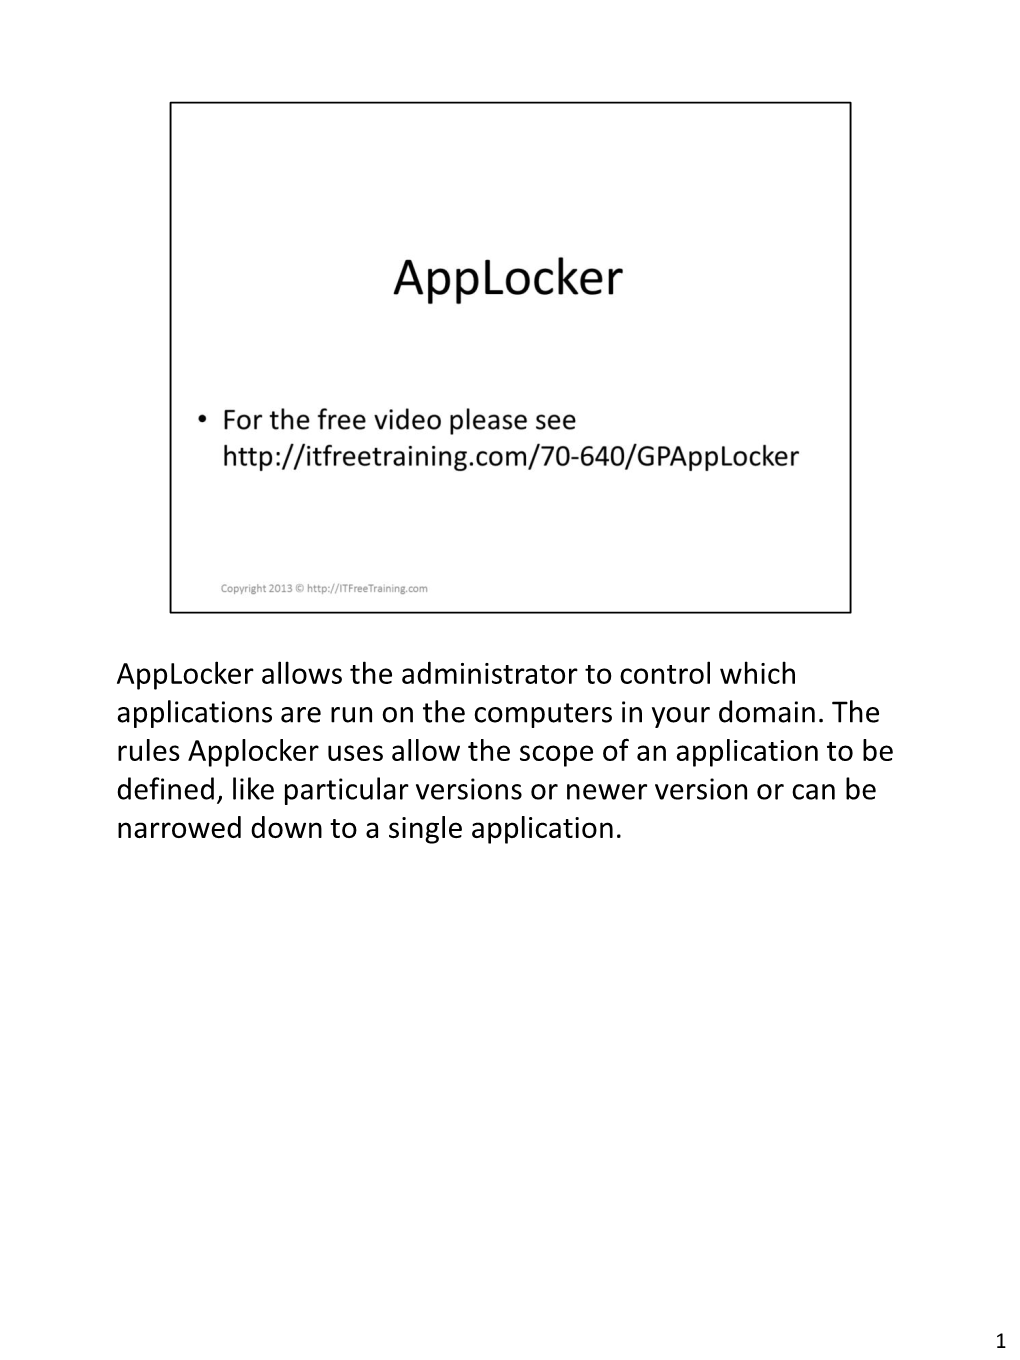 Applocker Allows the Administrator to Control Which Applications Are Run on the Computers in Your Domain